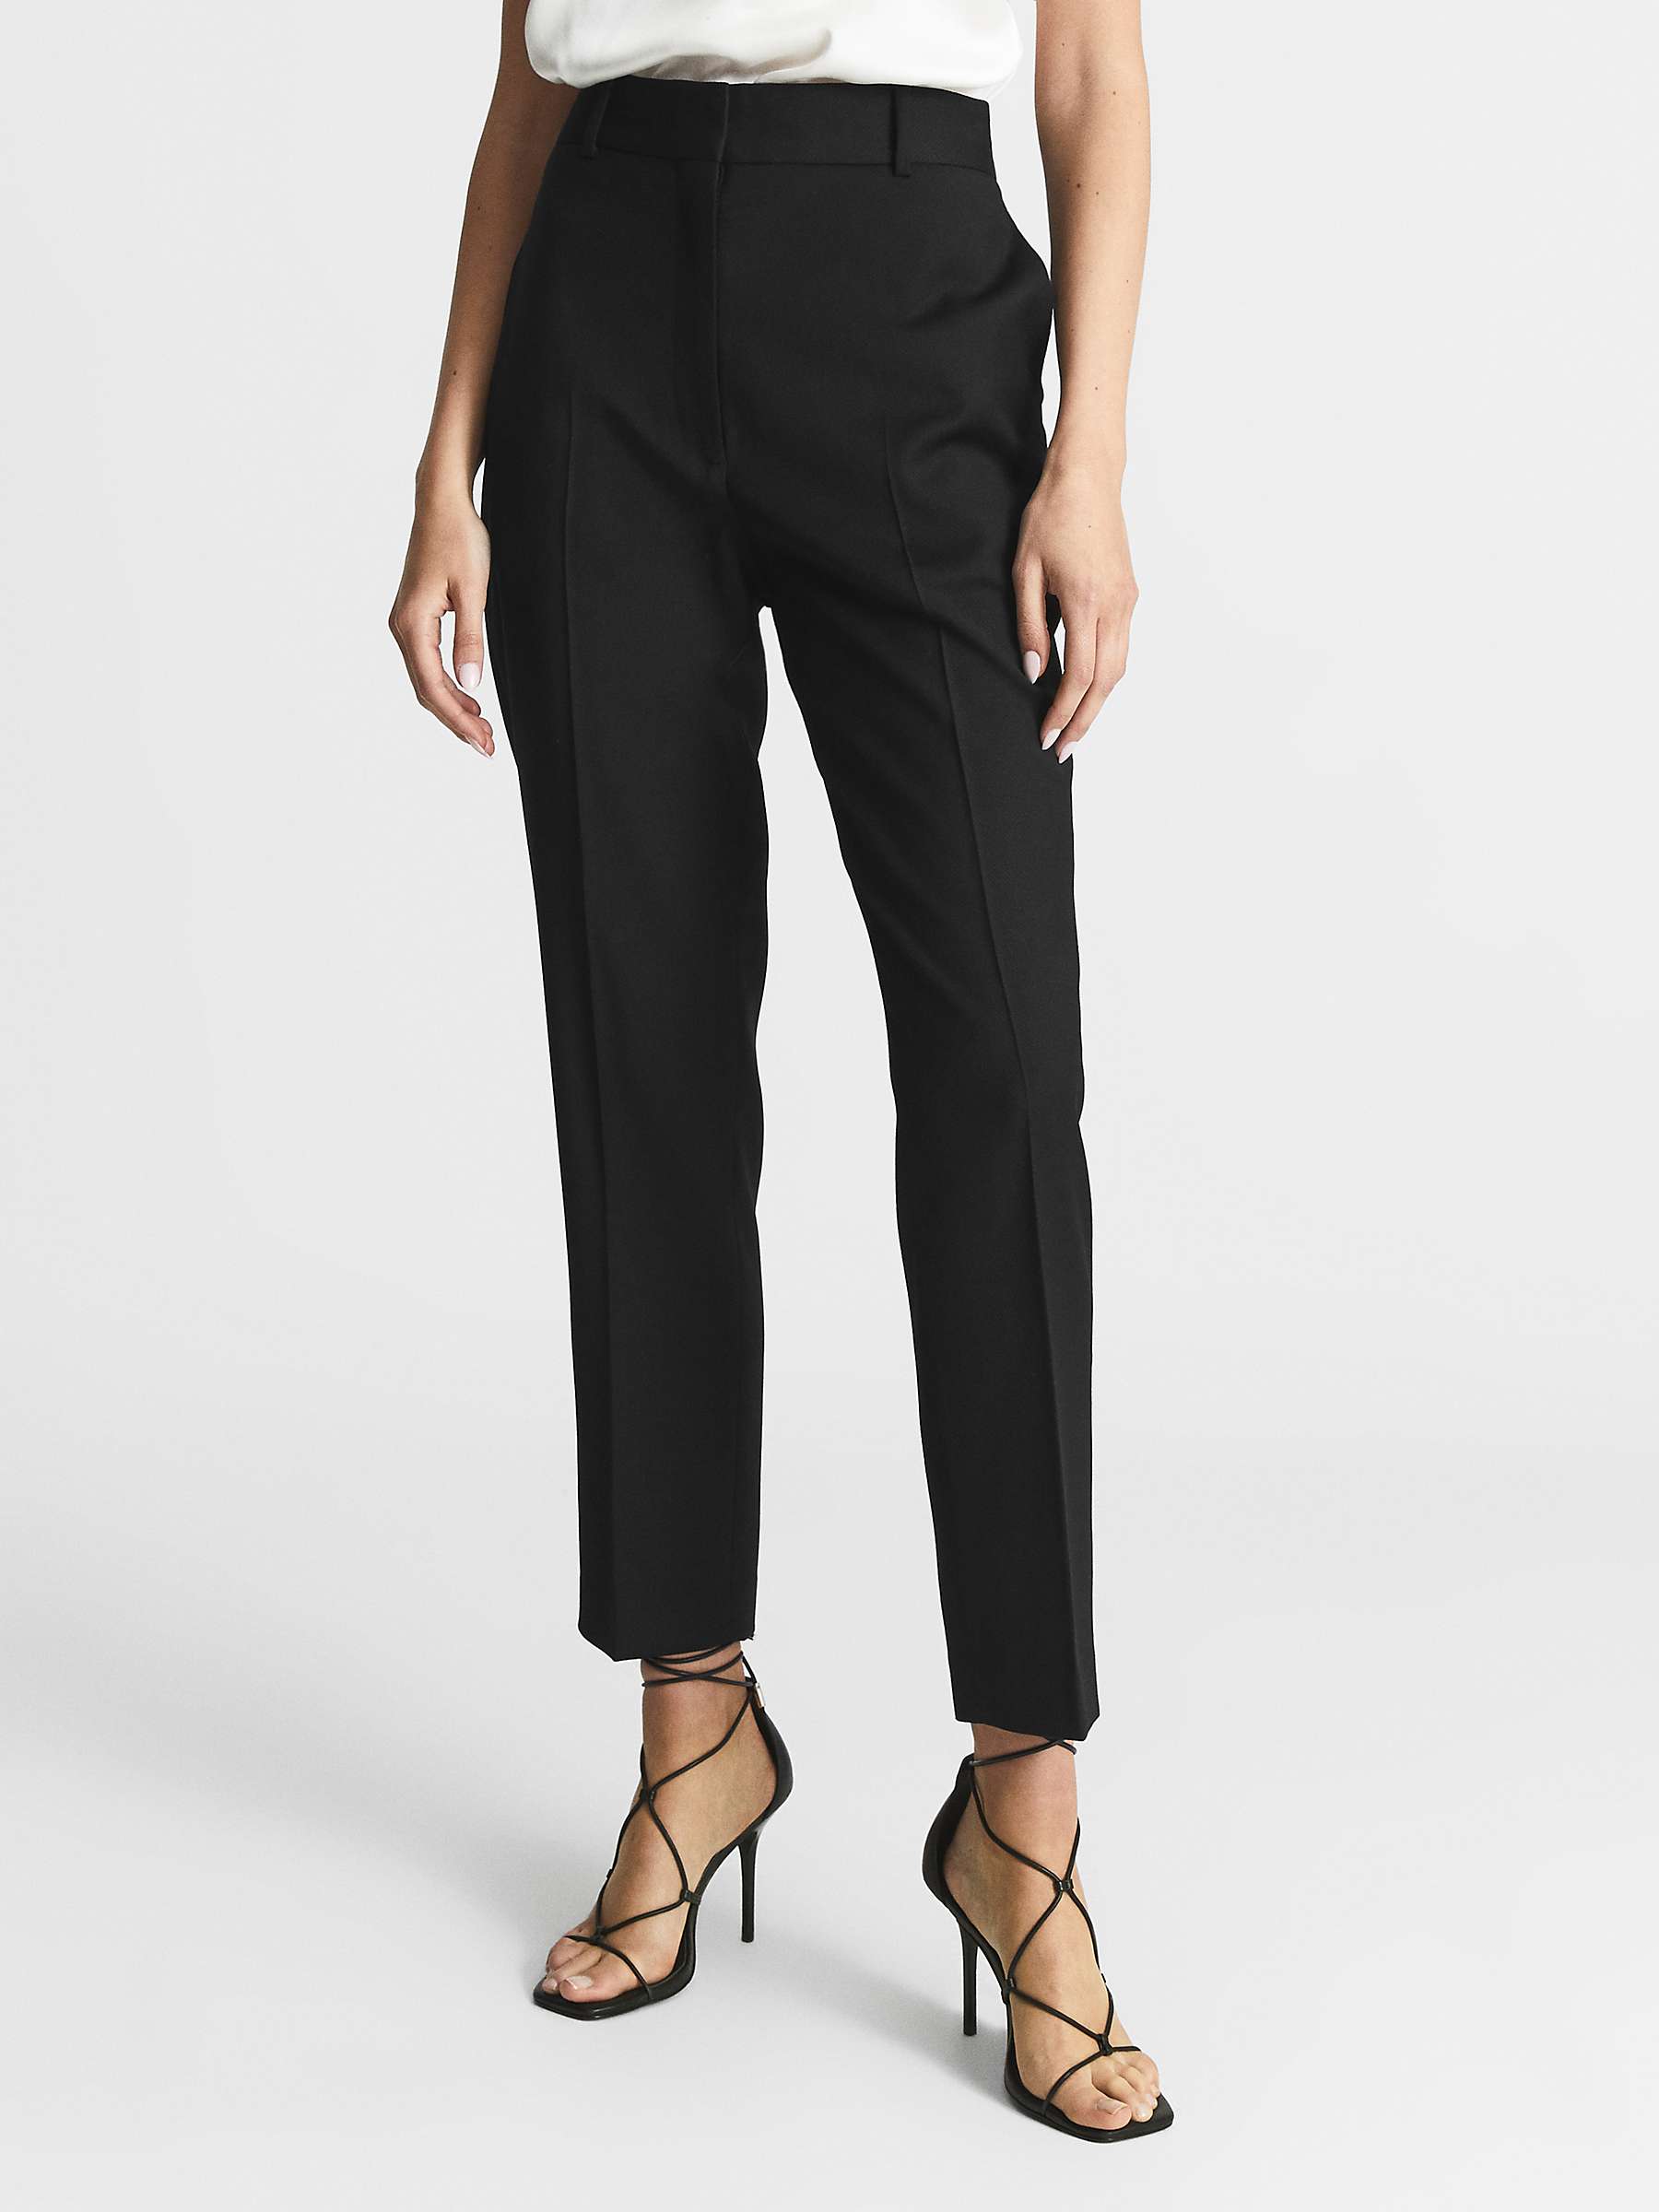 Buy Reiss Haisley Wool Blend Tailored Trousers Online at johnlewis.com